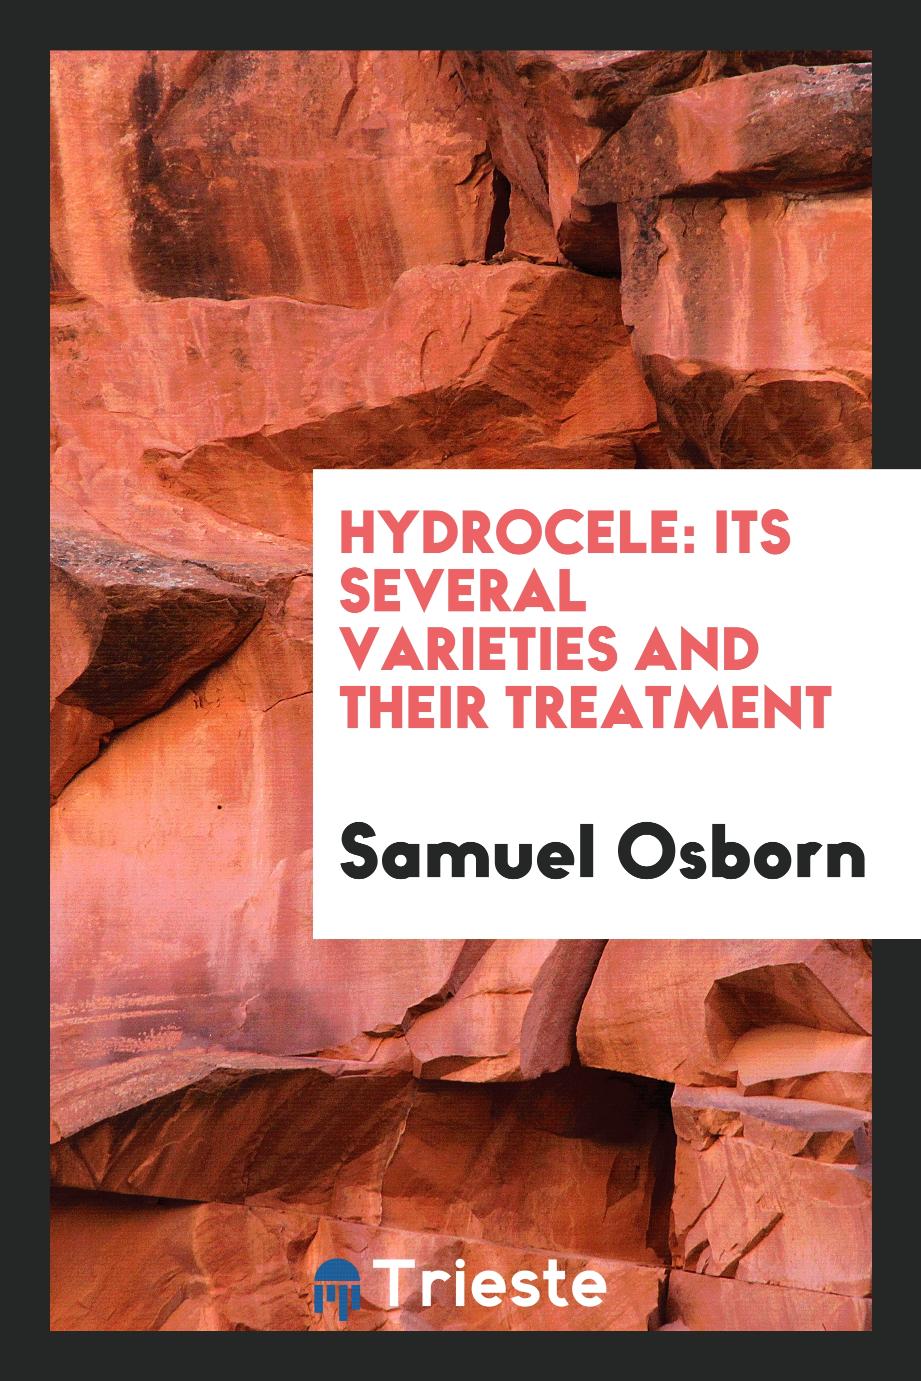 Hydrocele: Its Several Varieties and Their Treatment